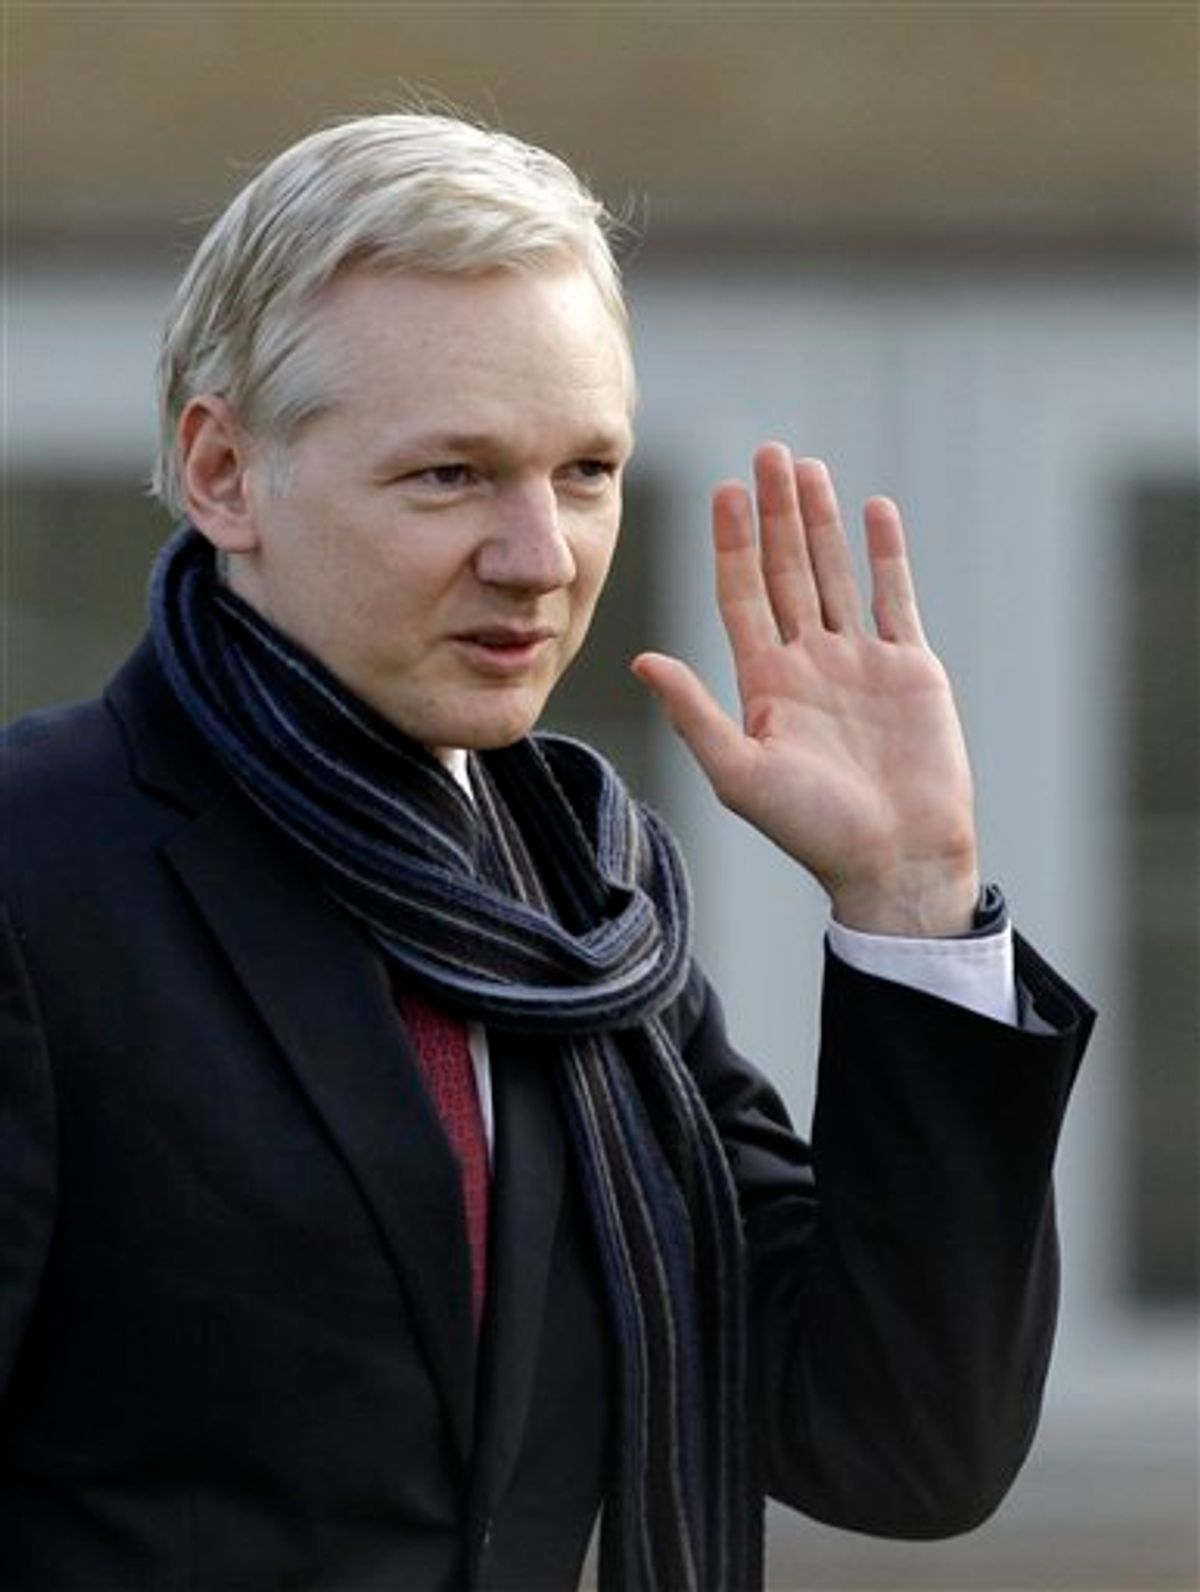 The founder of WikiLeaks Julian Assange waves as he leaves after speaking to the media after his extradition hearing at Belmarsh Magistrates' Court in London, Thursday, Feb. 24, 2011.  Julian Assange can be extradited to Sweden in a sex crimes inquiry, a British judge ruled Thursday, rejecting claims by the WikiLeaks founder that he would not face a fair trial there. Assange's lawyer said he would appeal.  Judge Howard Riddle said the allegations of rape and sexual molestation by two women against Assange meet the definition of extraditable offenses and said the Swedish warrant had been properly issued and was valid.  (AP Photo/Matt Dunham) (AP)